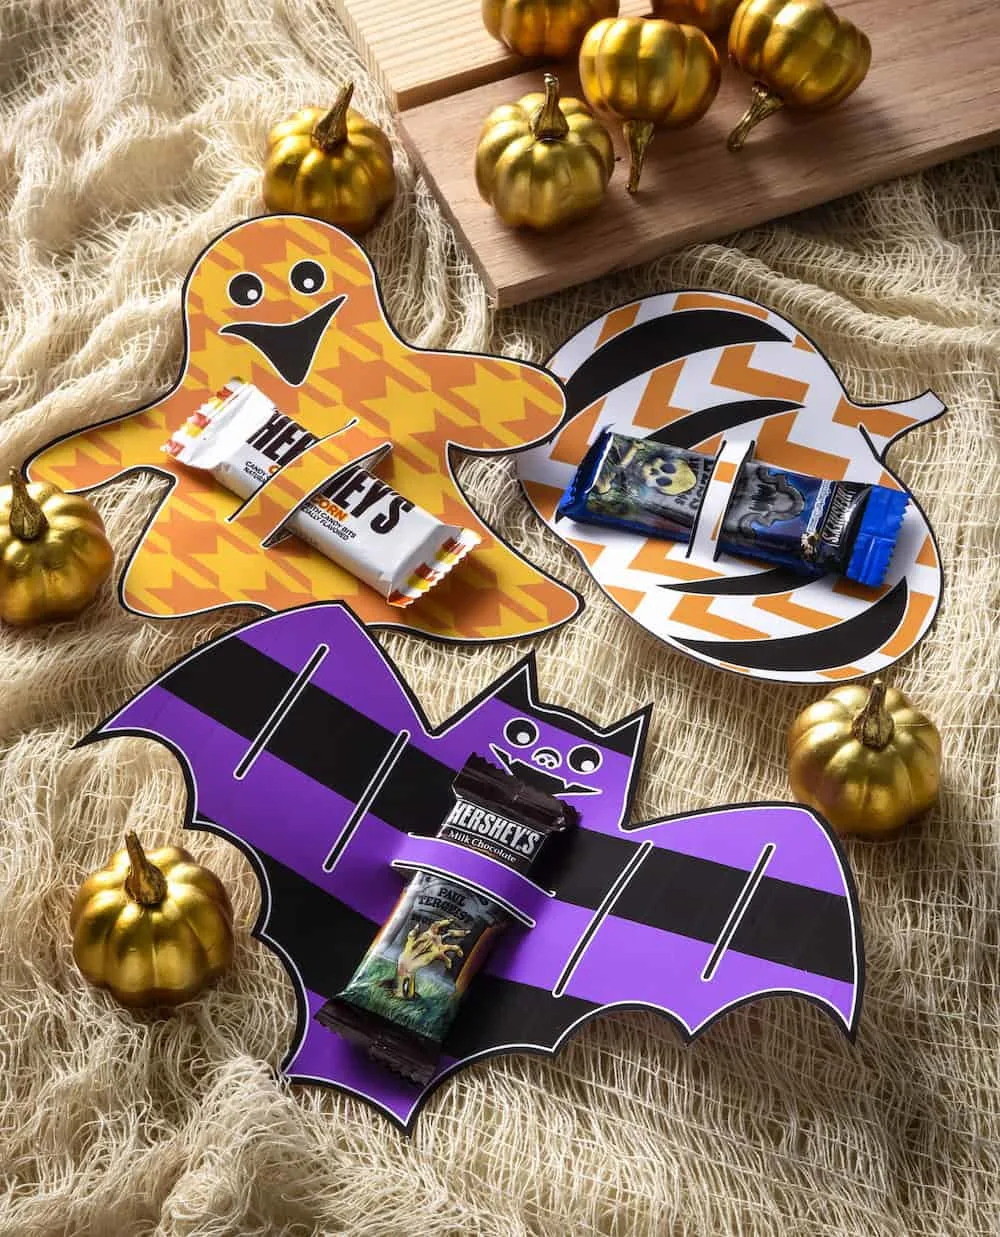 These Halloween candy bar wrappers are perfect for using as party favors, or for passing out to trick or treaters . . . and they're free!